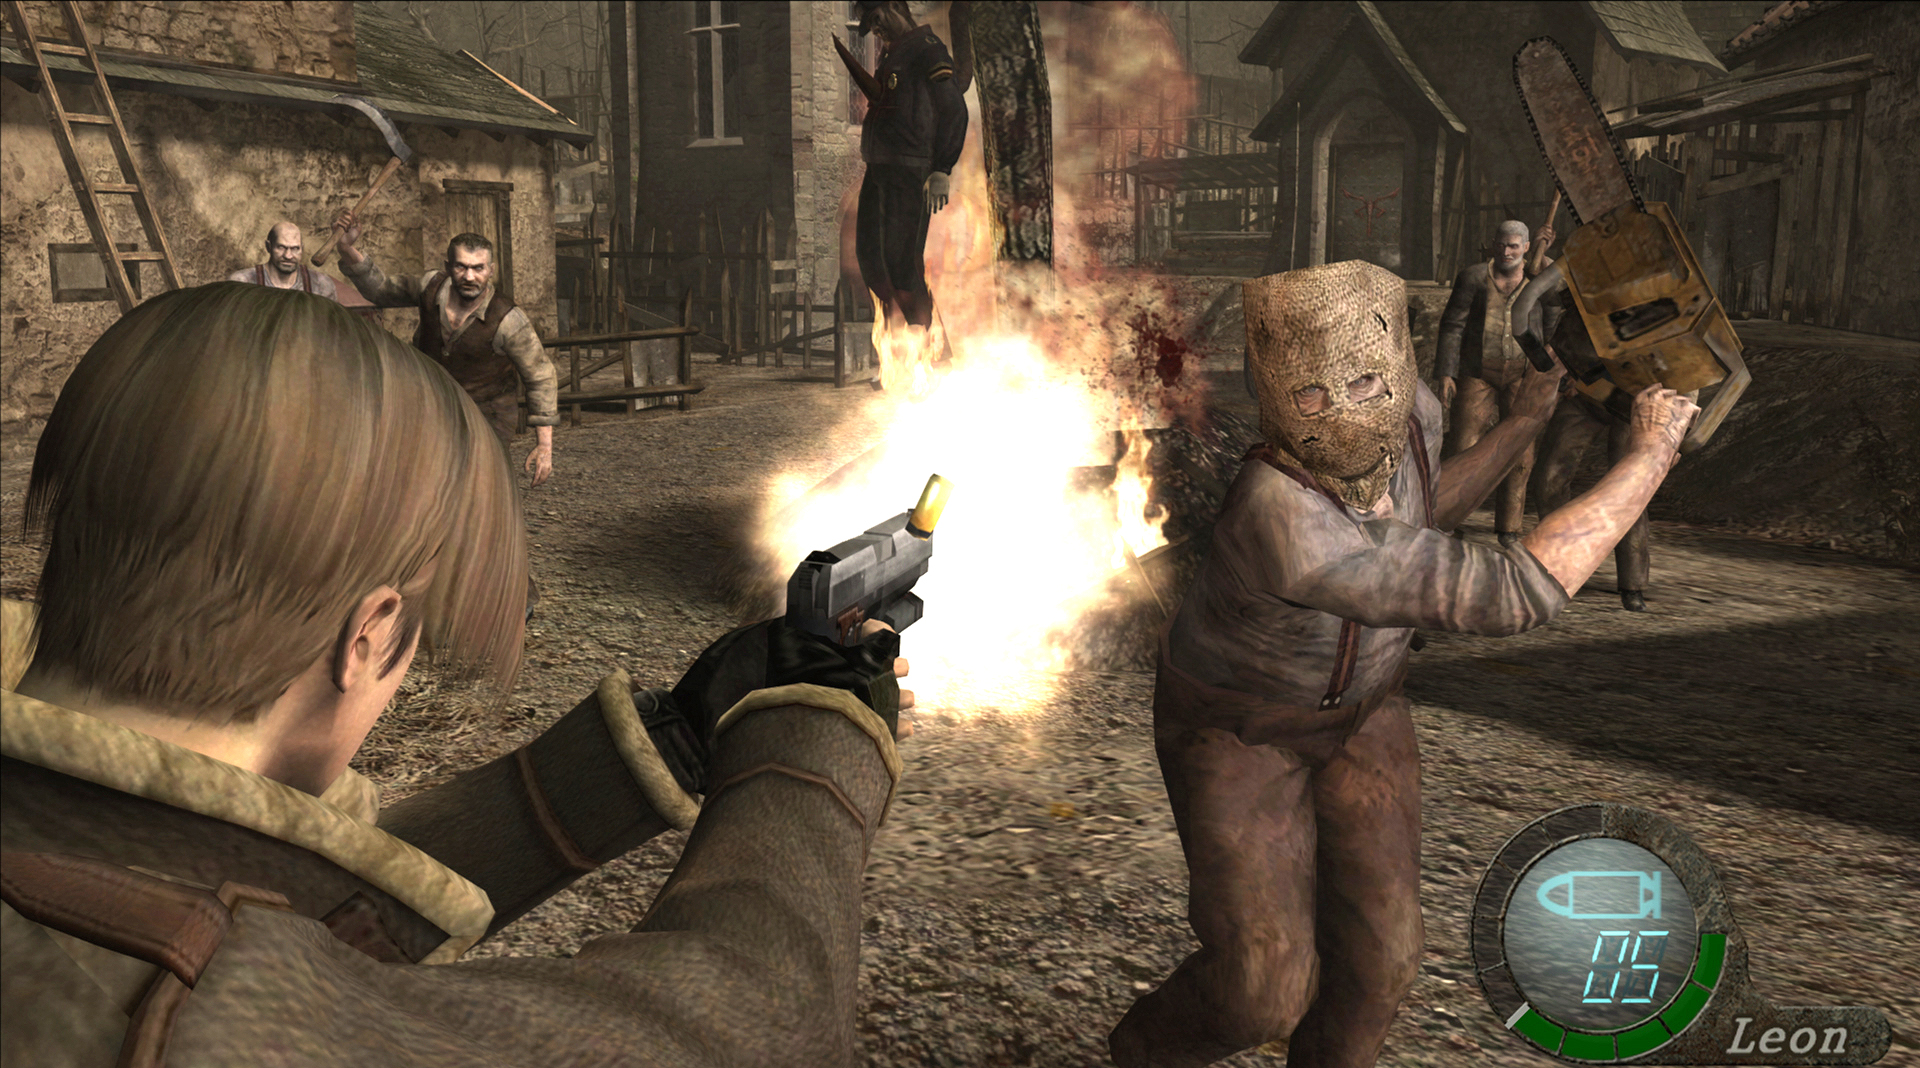 Resident Evil 4 Remake Controls And Key Bindings